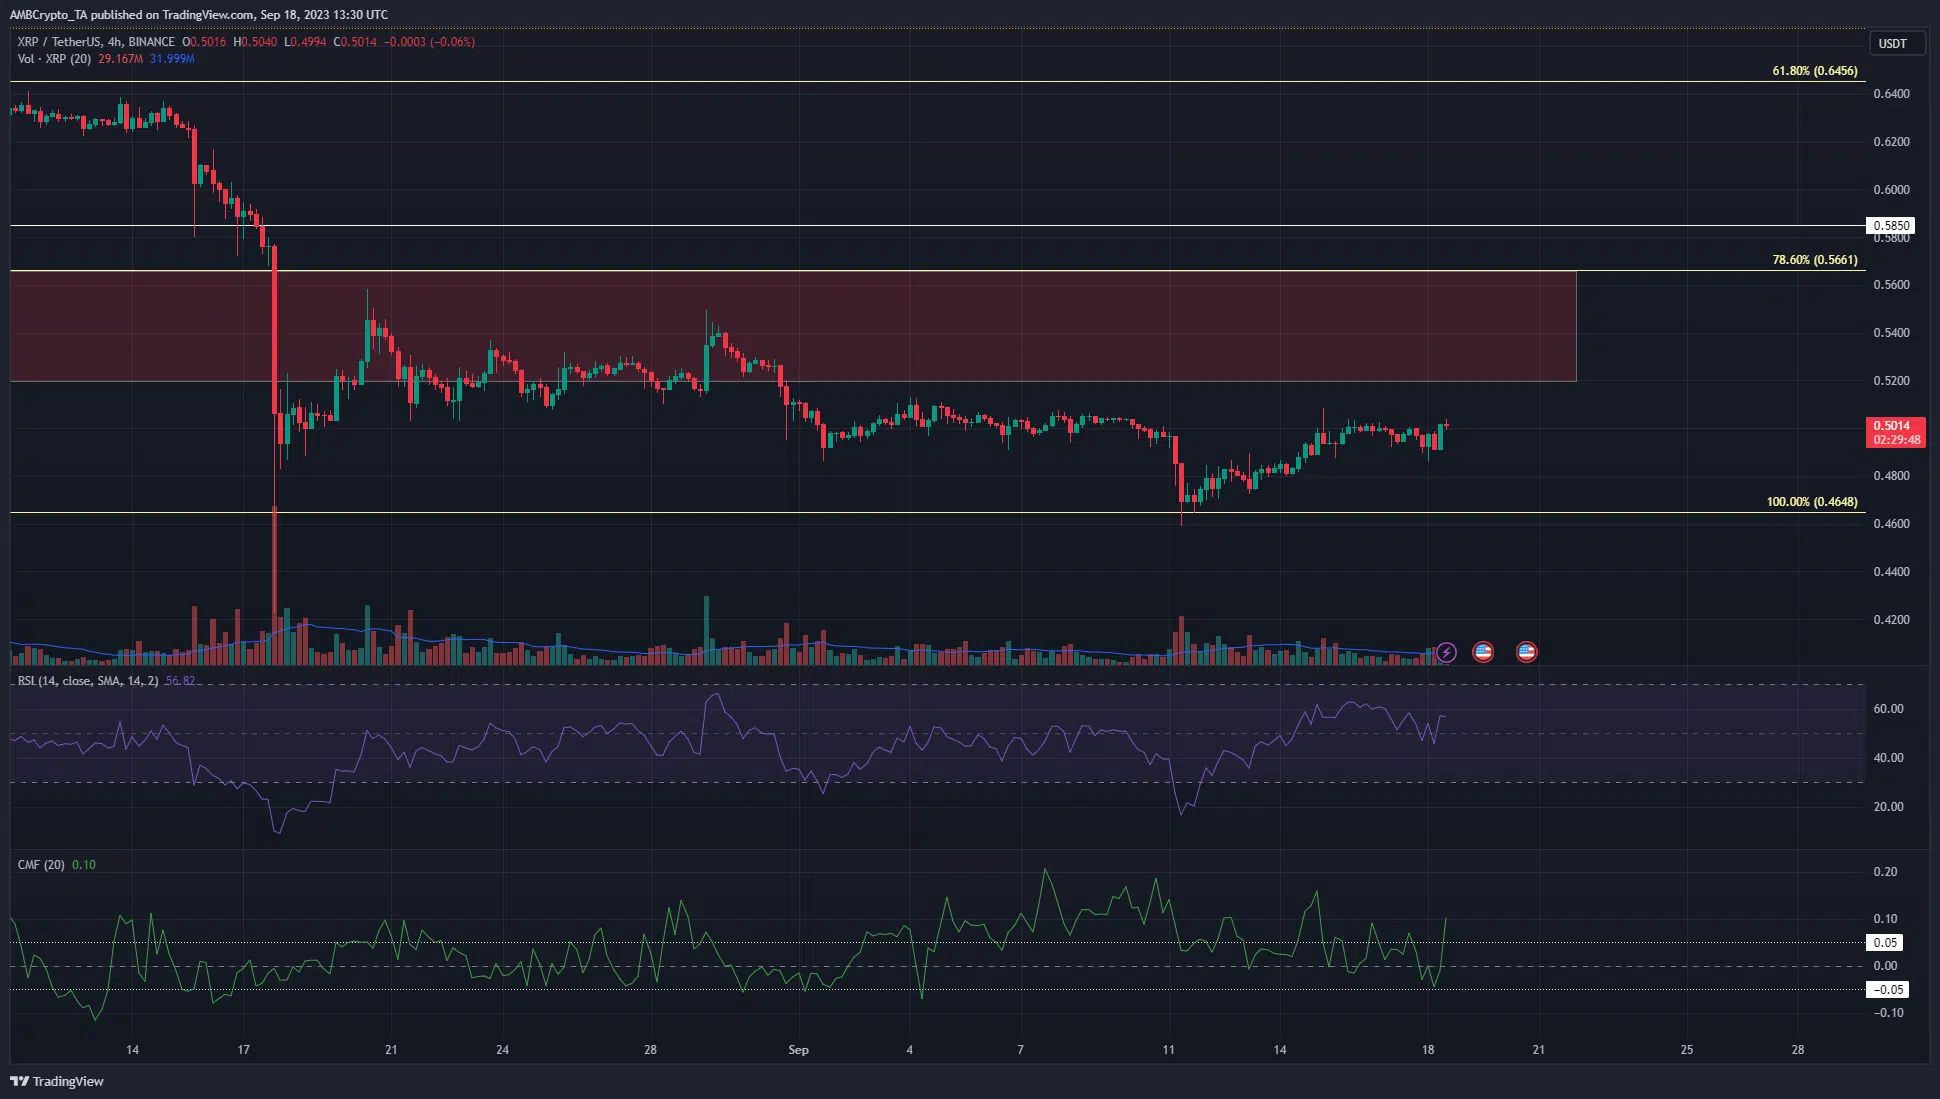 XRP bounces to reach local resistance but the move could extend higher